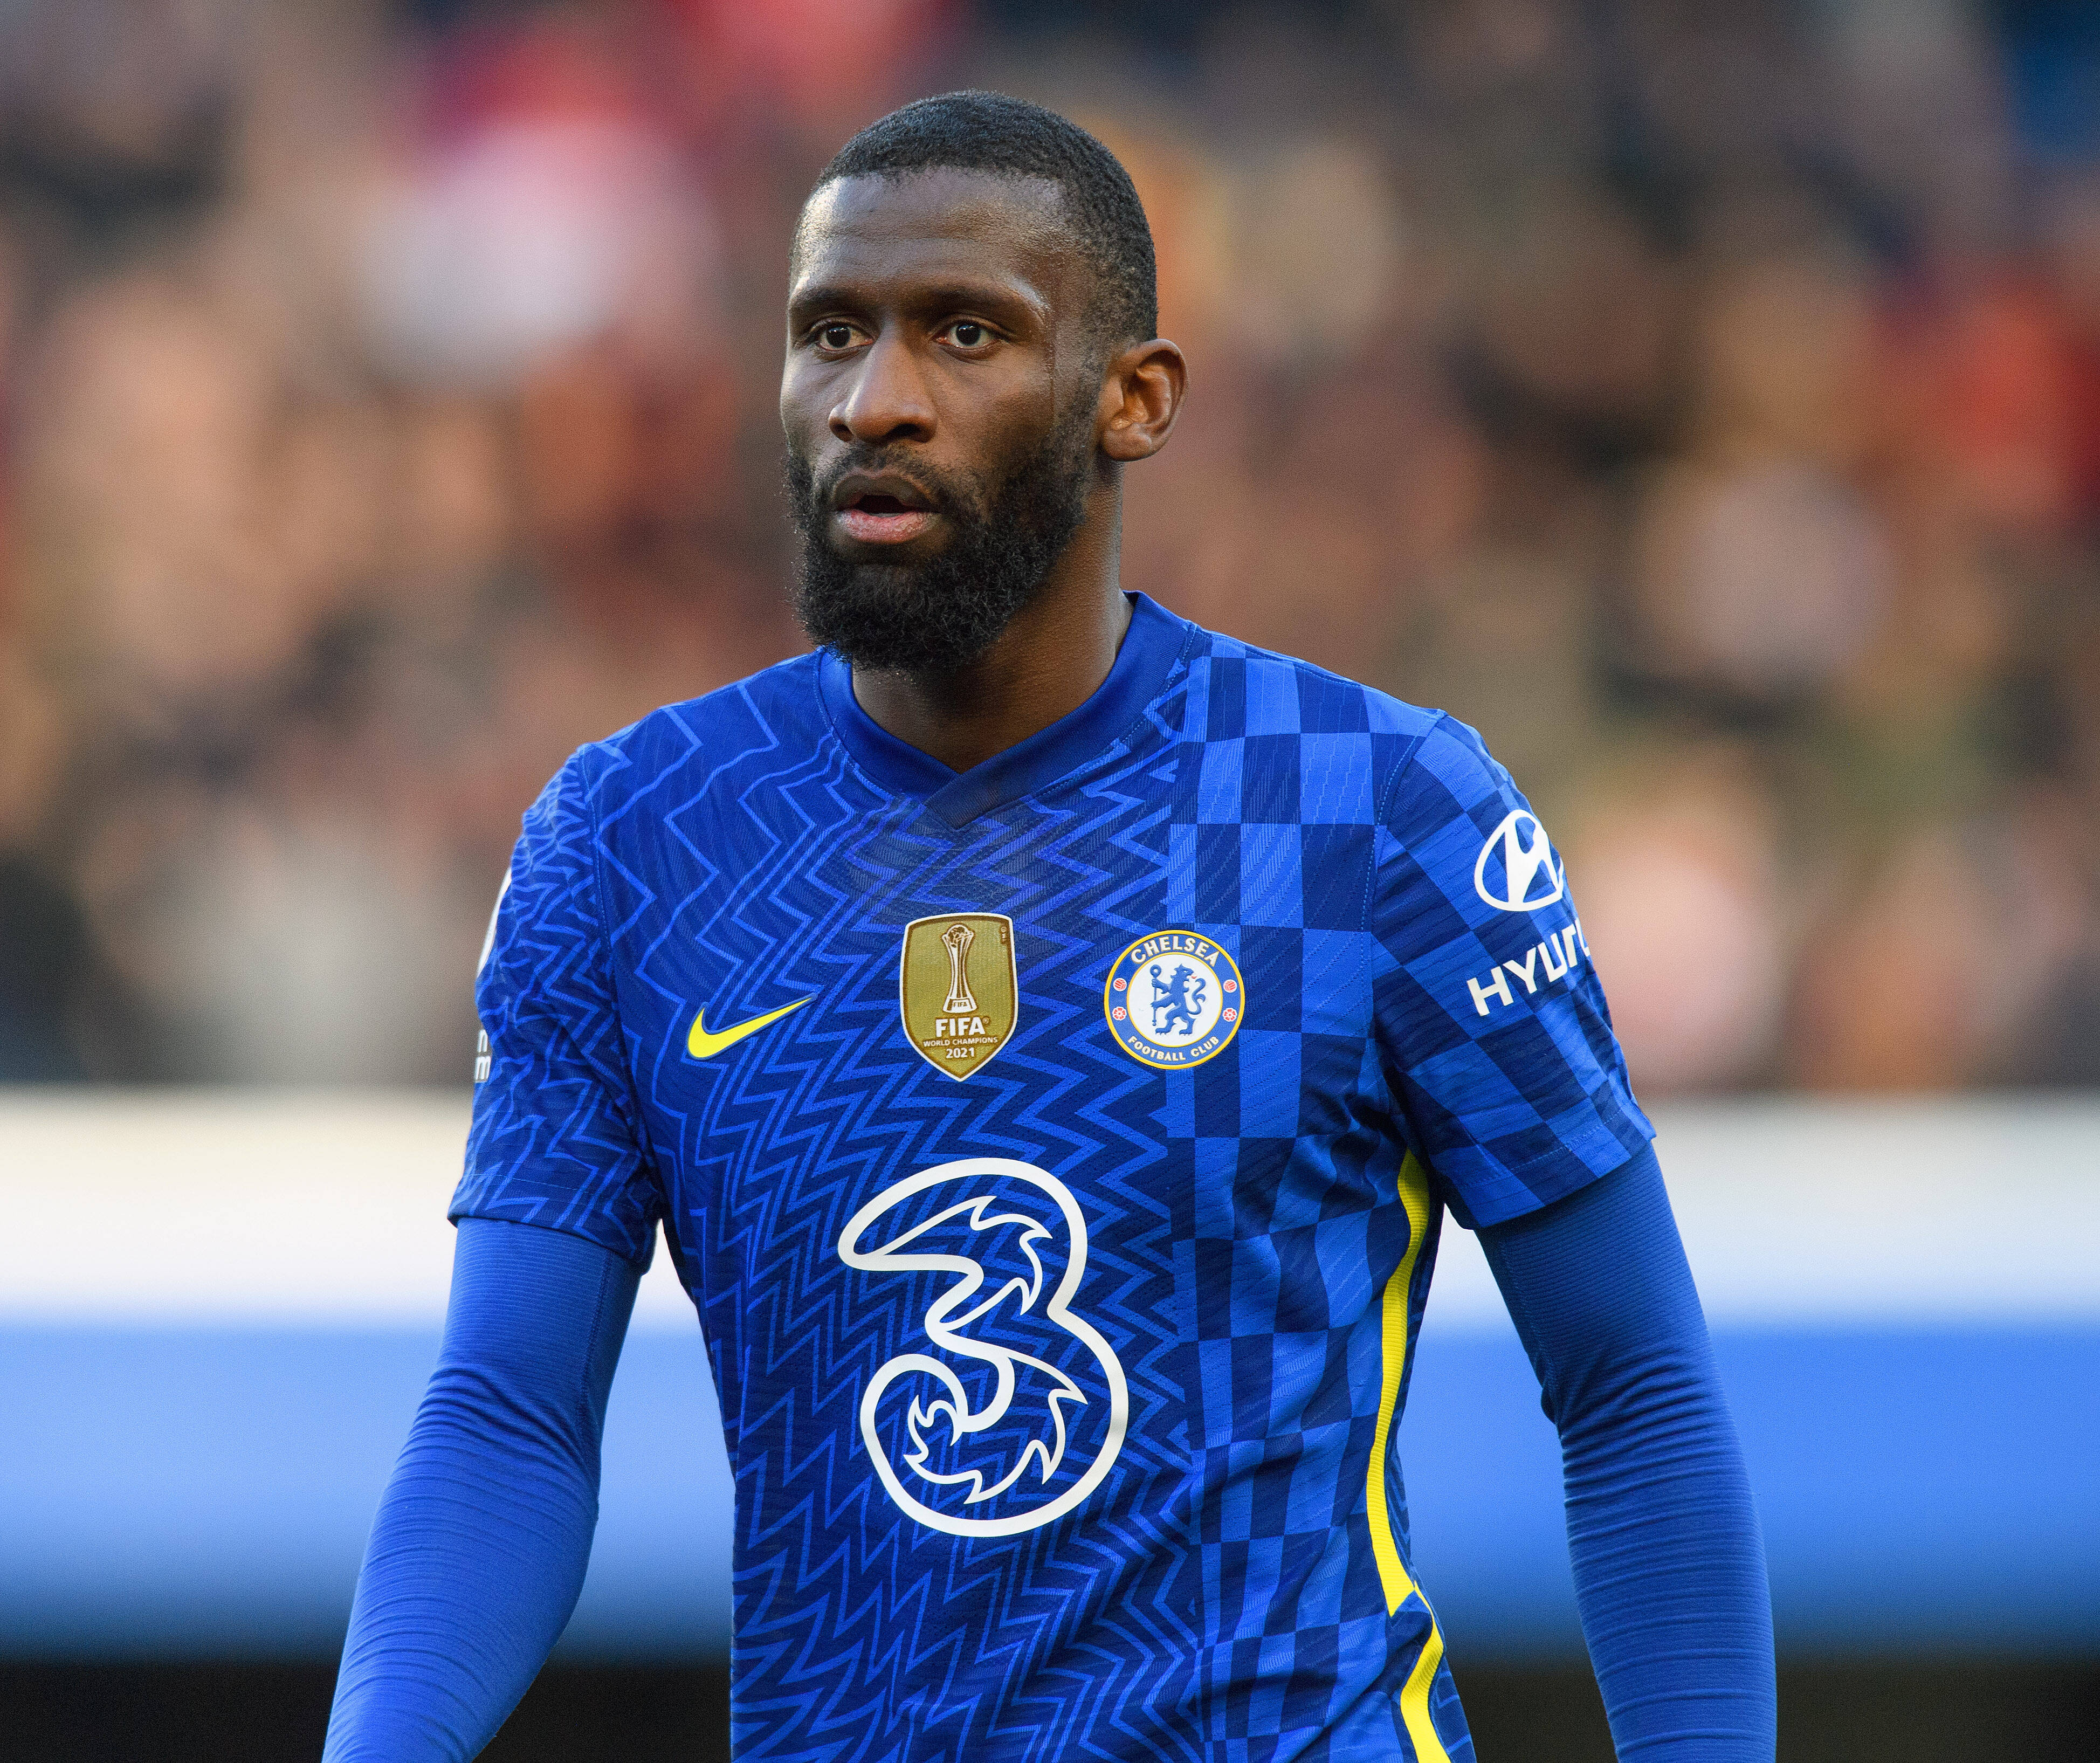 Chelsea's German defender Antonio Rudiger will reportedly decide on his future by the end of April